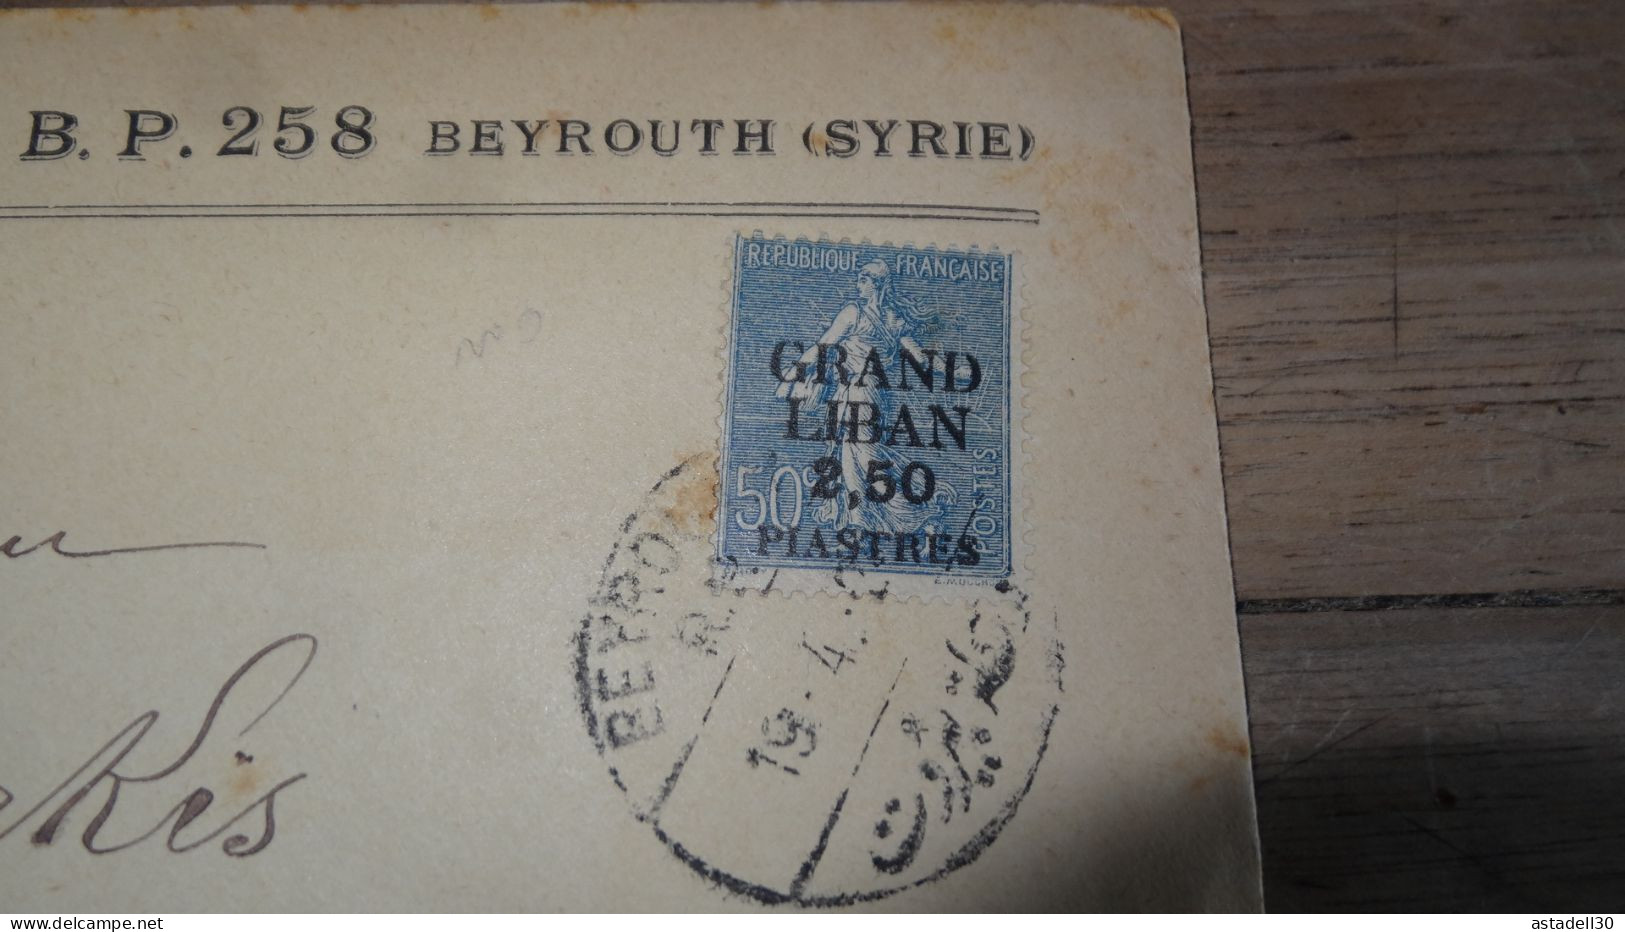 Enveloppe GRAND LIBAN, Beyrouth 1924  ......... Boite1 ..... 240424-217 - Covers & Documents